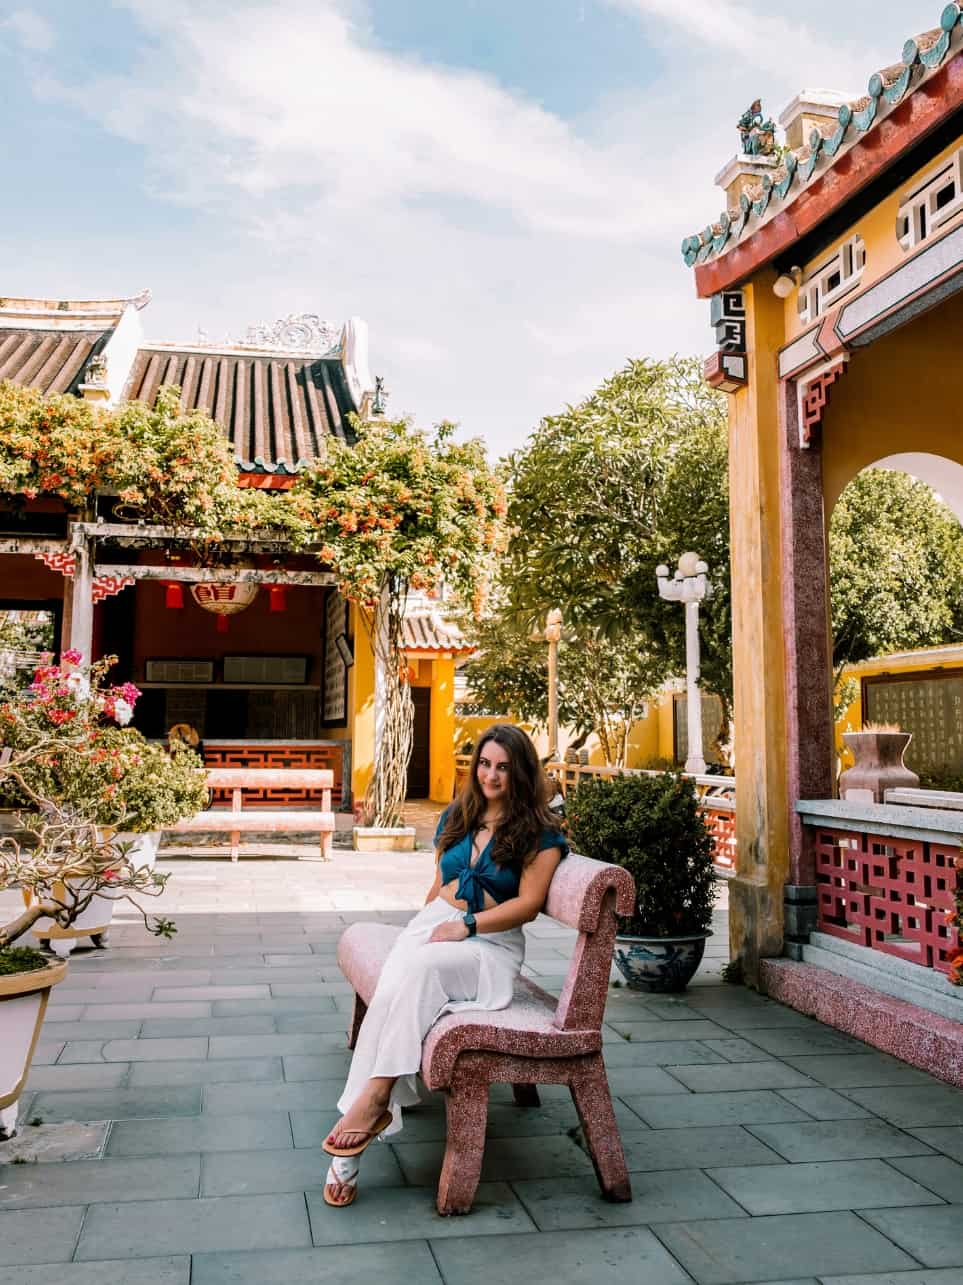 Me sitting on a bench in the open air courtyard of the Hainan Assembly Hall in Hoi An. 